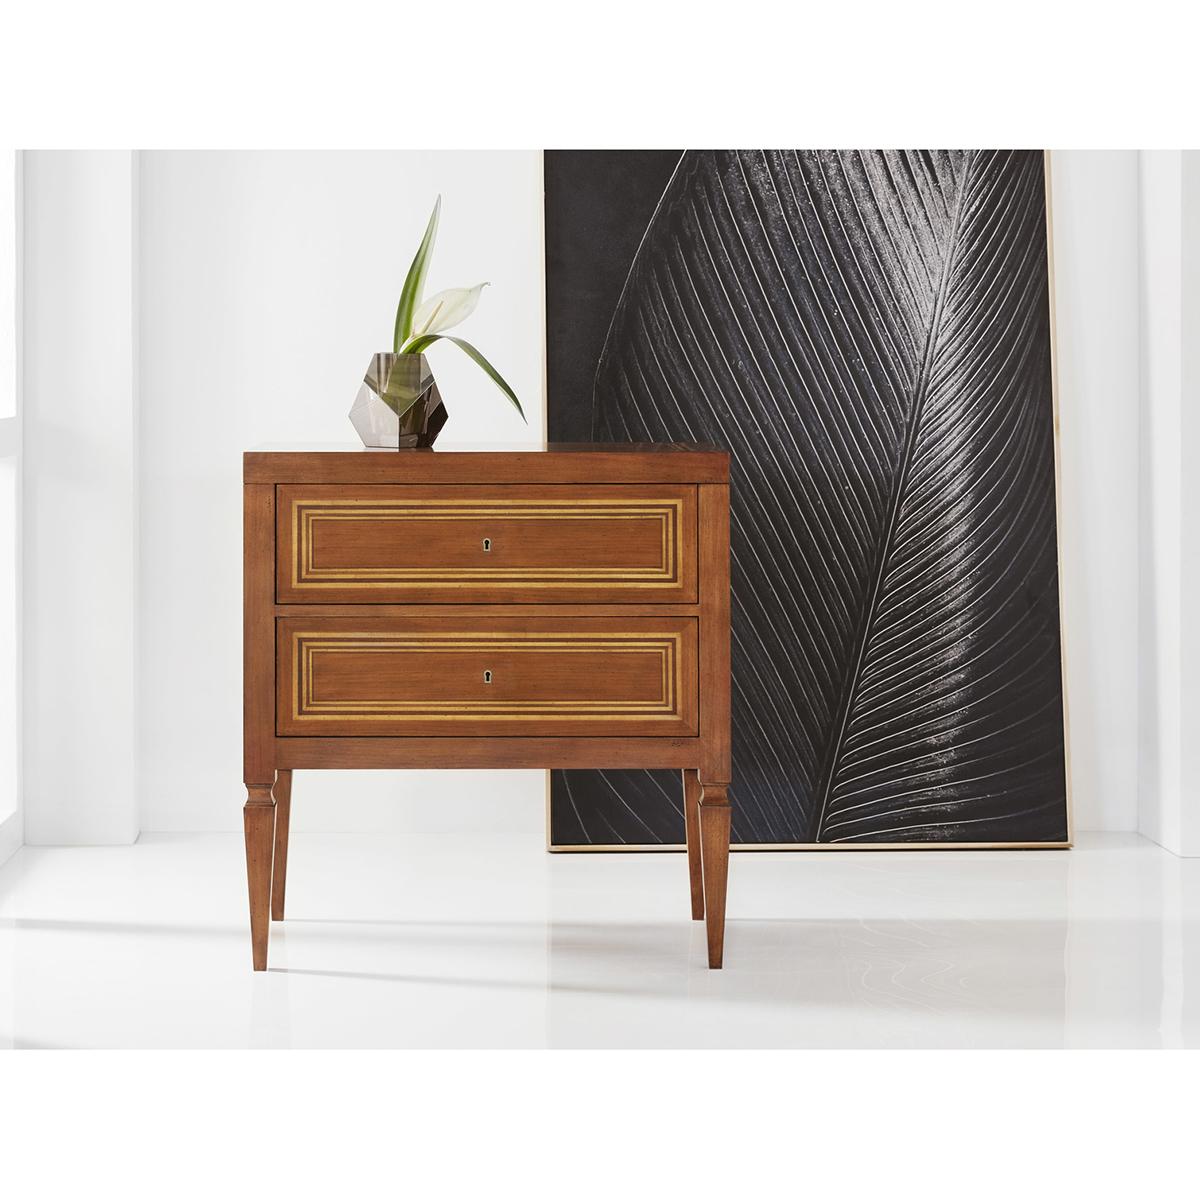 Italian Neo Classic bedside chest. A wonderful reproduction of fine 18th-century Italian cabinetry. Made with Fruitwood and geometric inlays to the drawers and side panels. With working locks on the two drawers and raised on square tapered